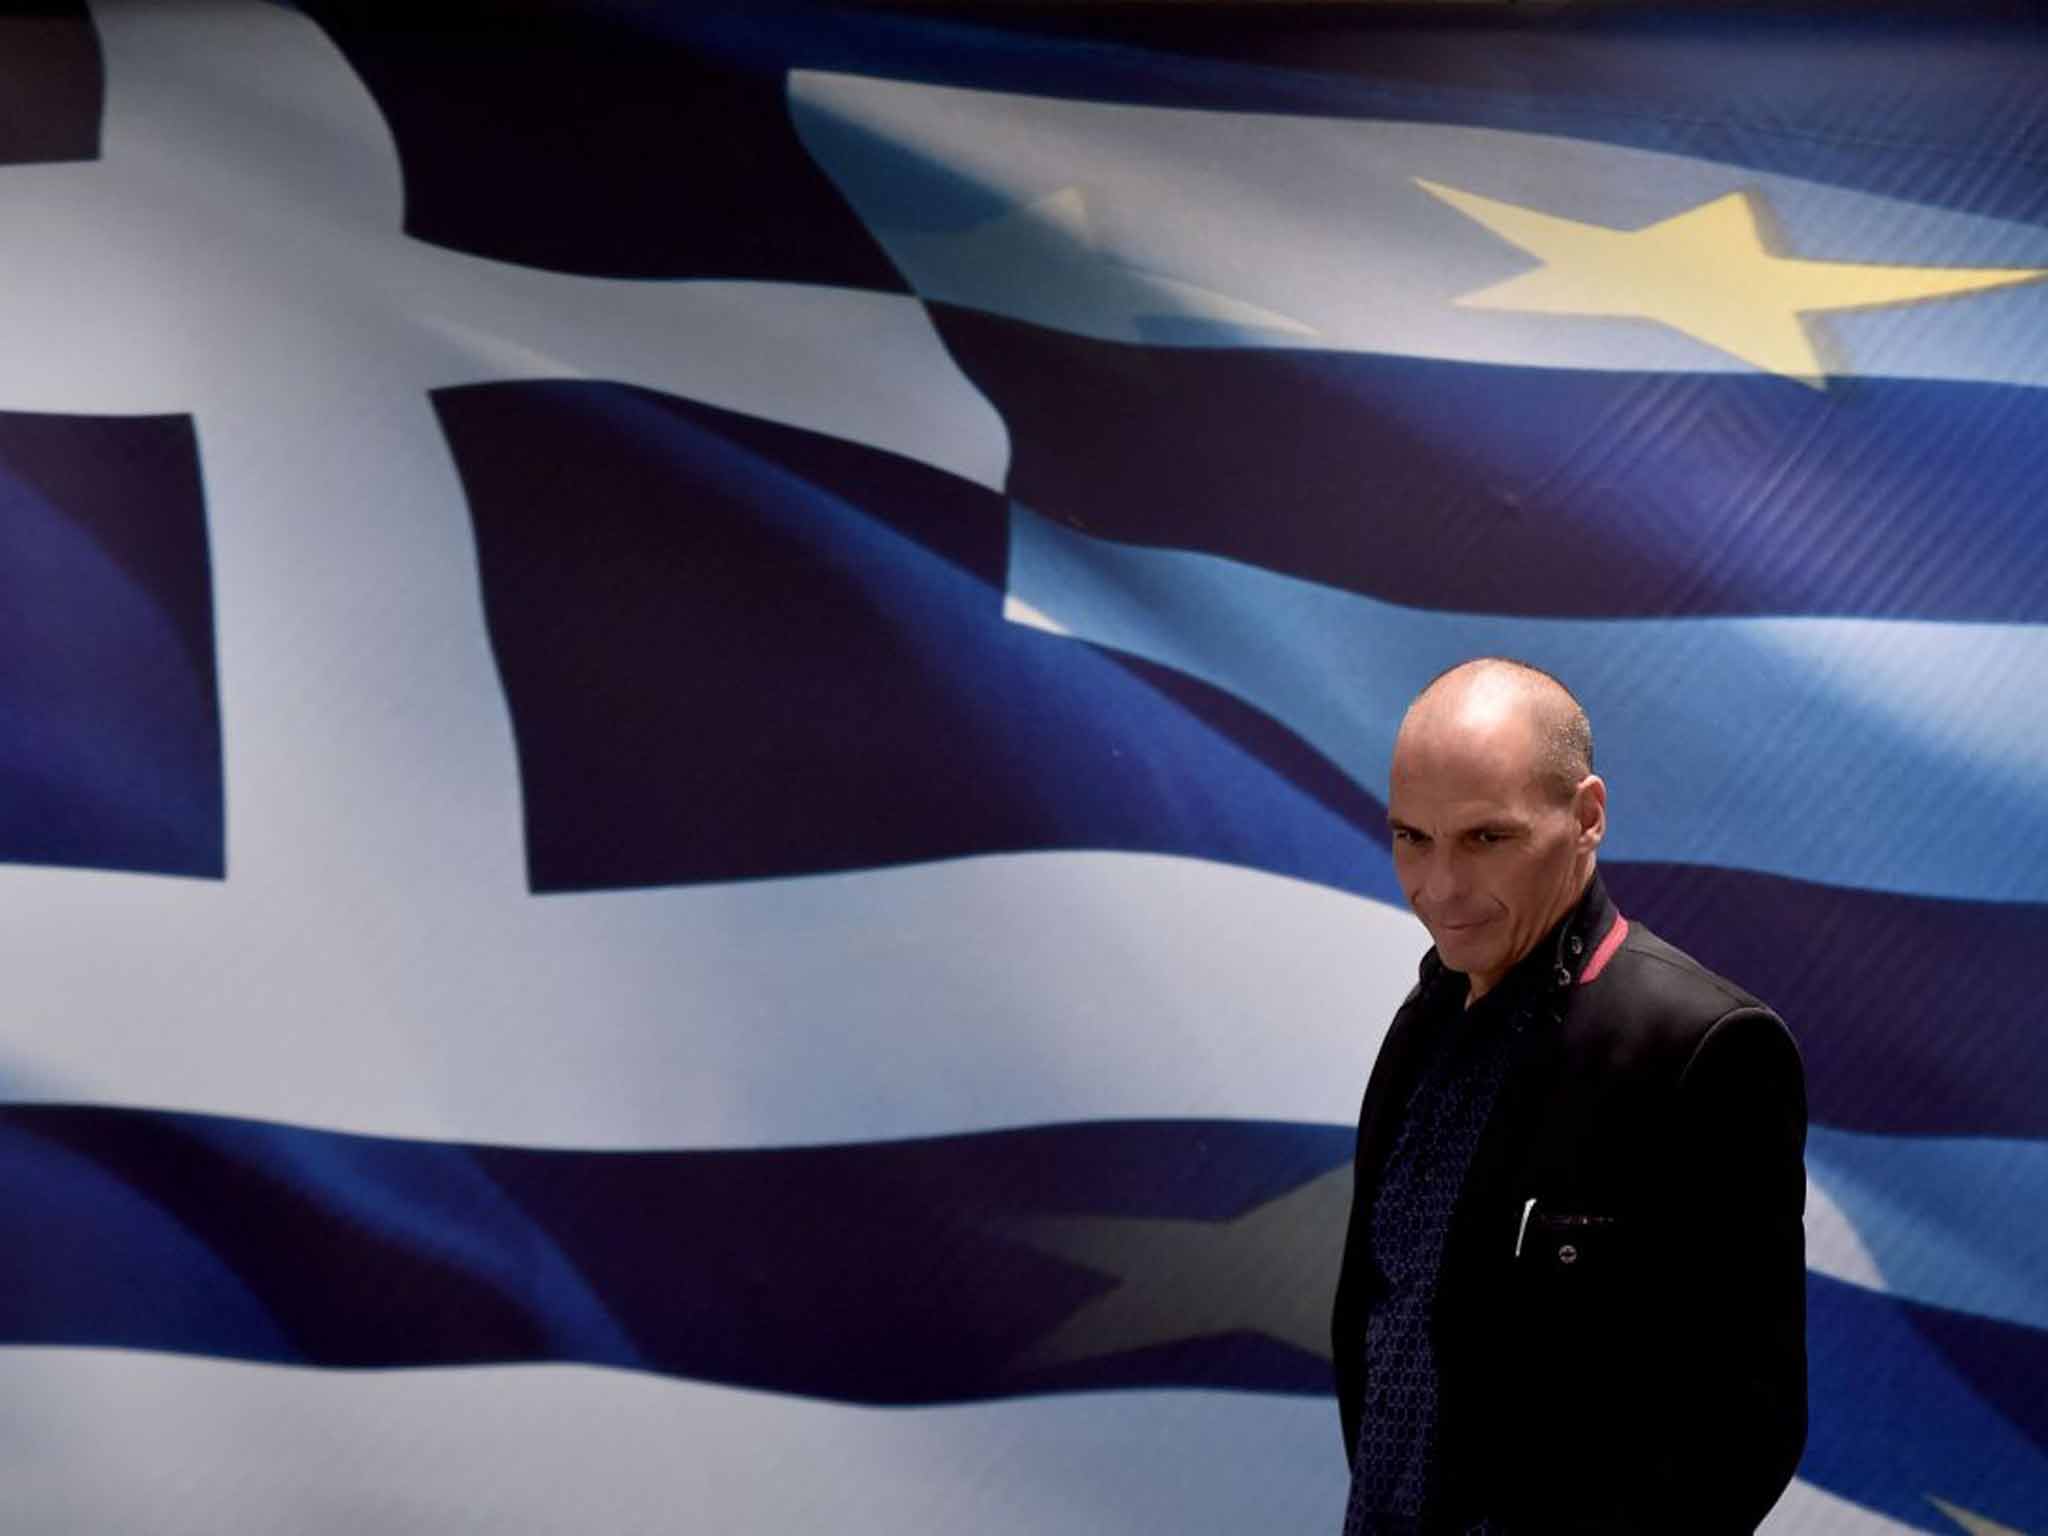 Yanis Varoufakis called the bailout extension 'absurd' on Monday